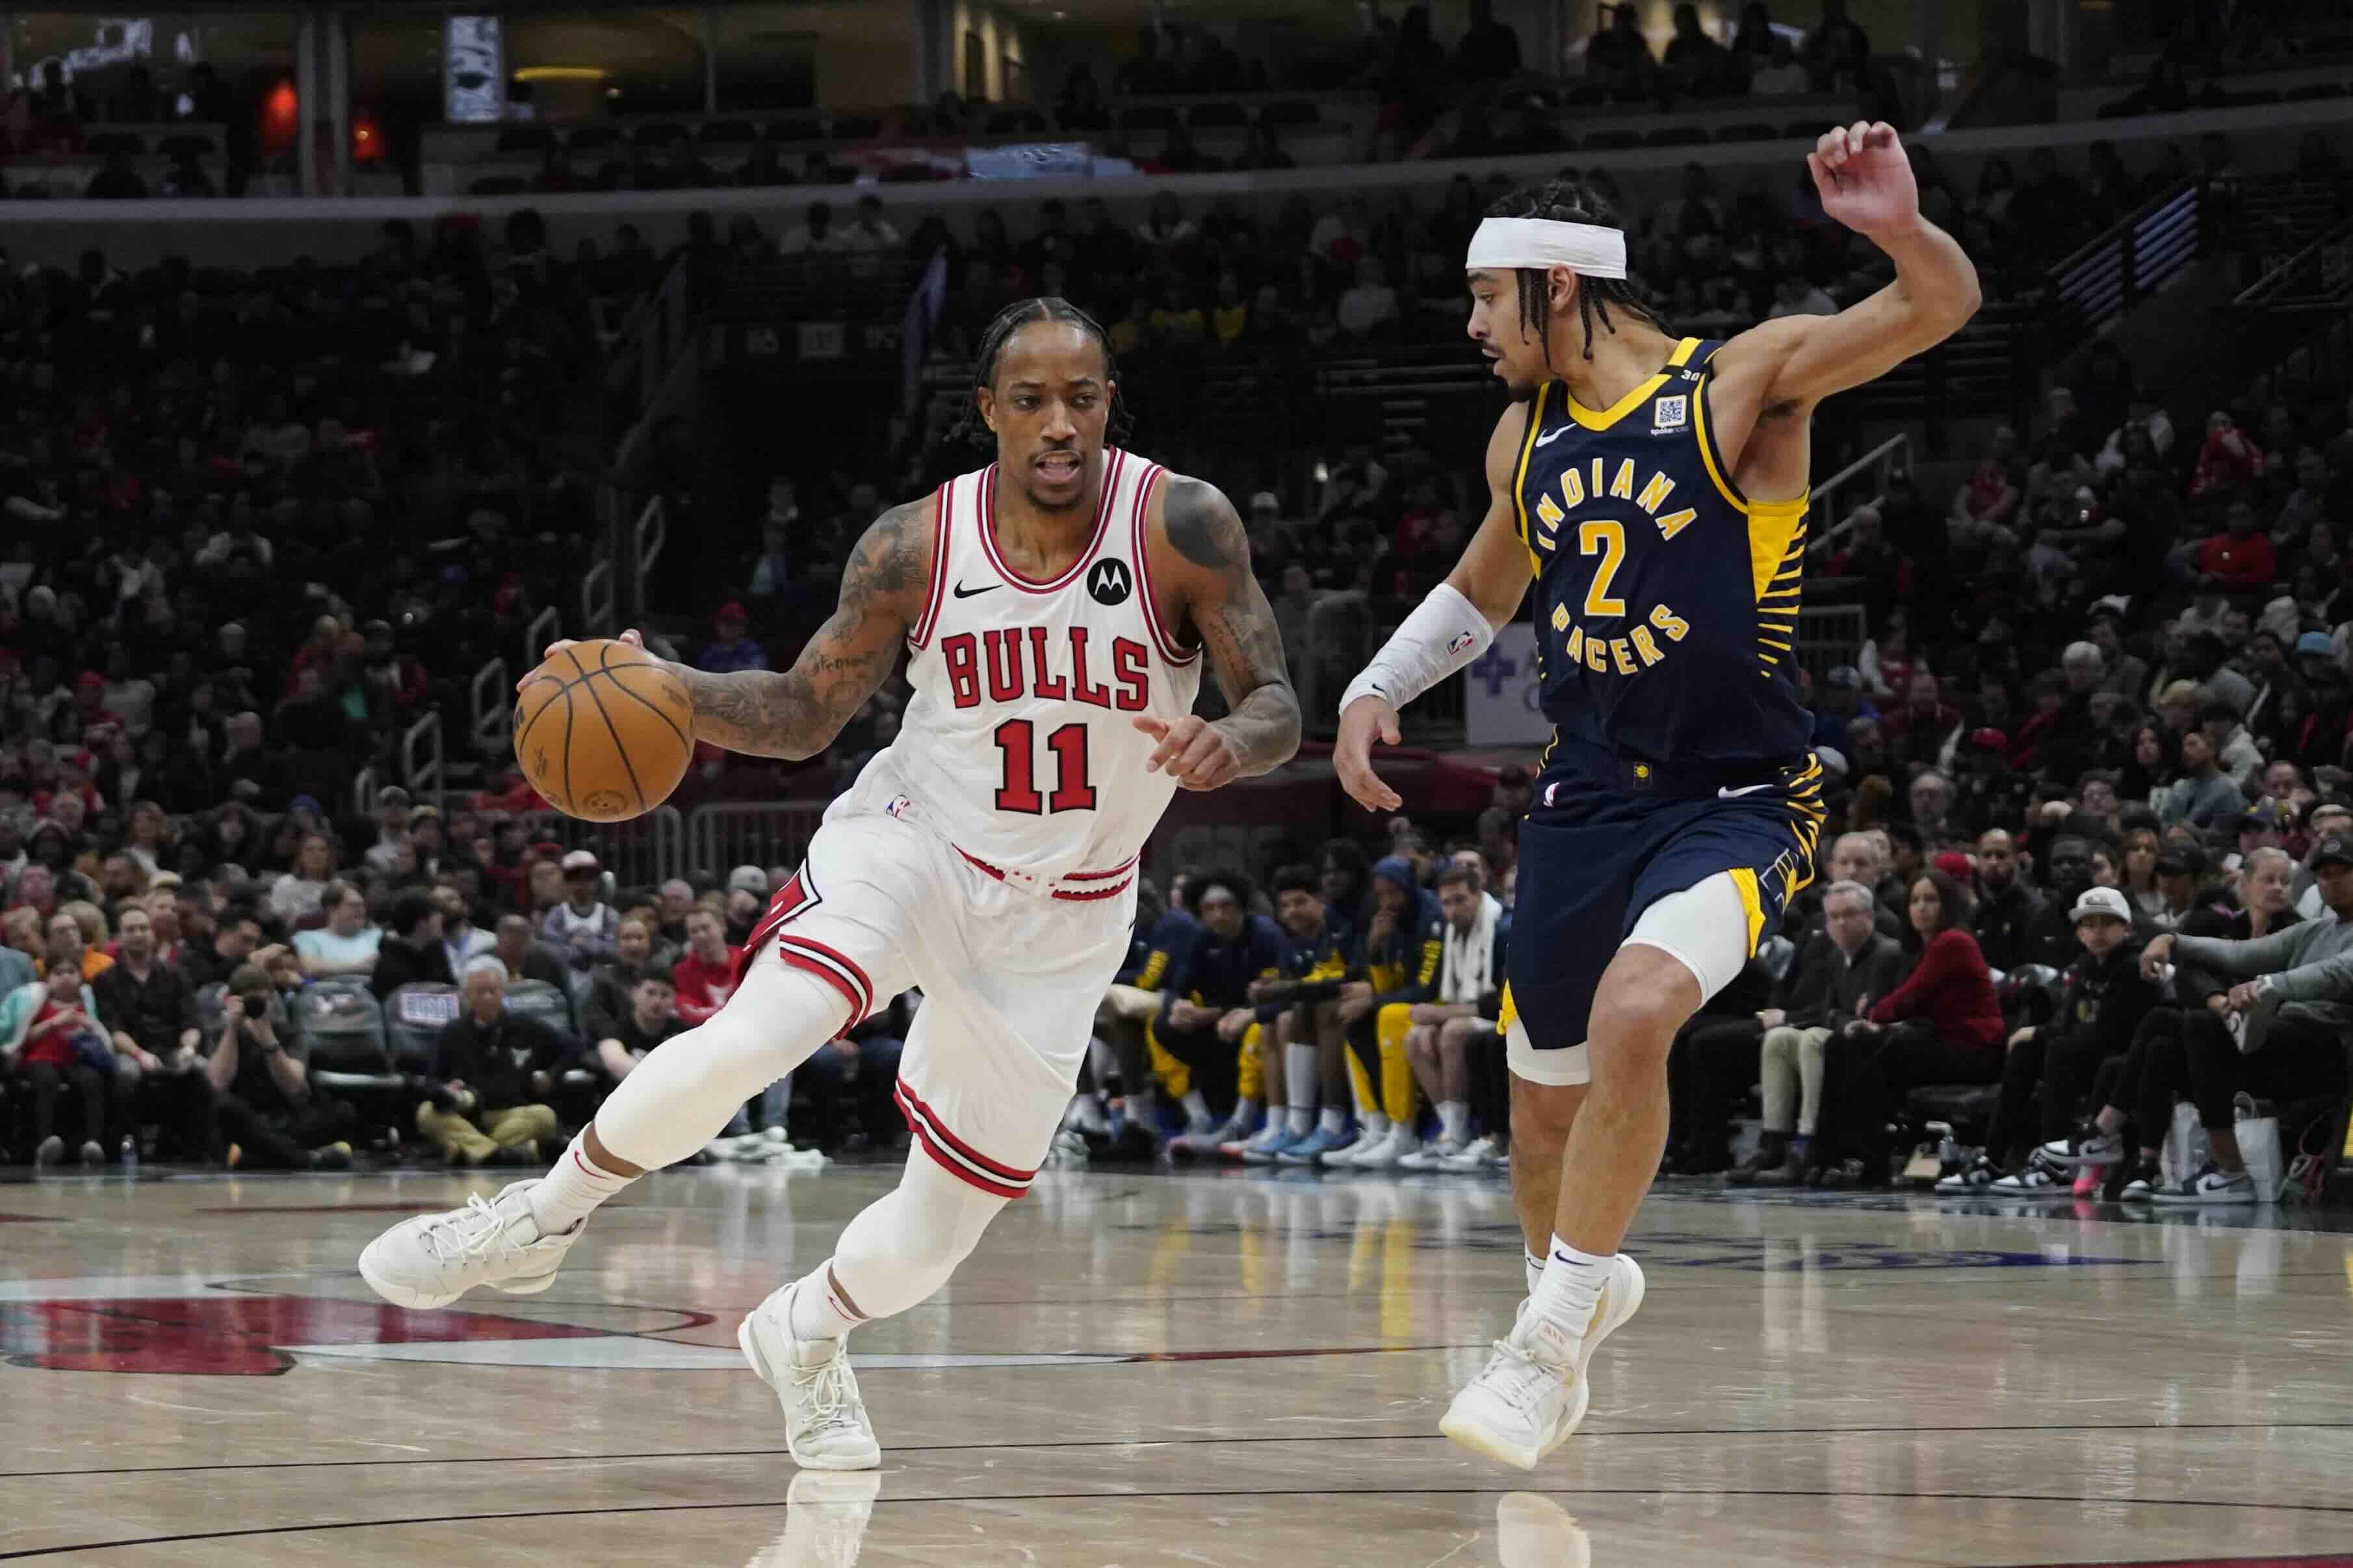 NBA: Bulls knock off Pacers, end 3-game skid